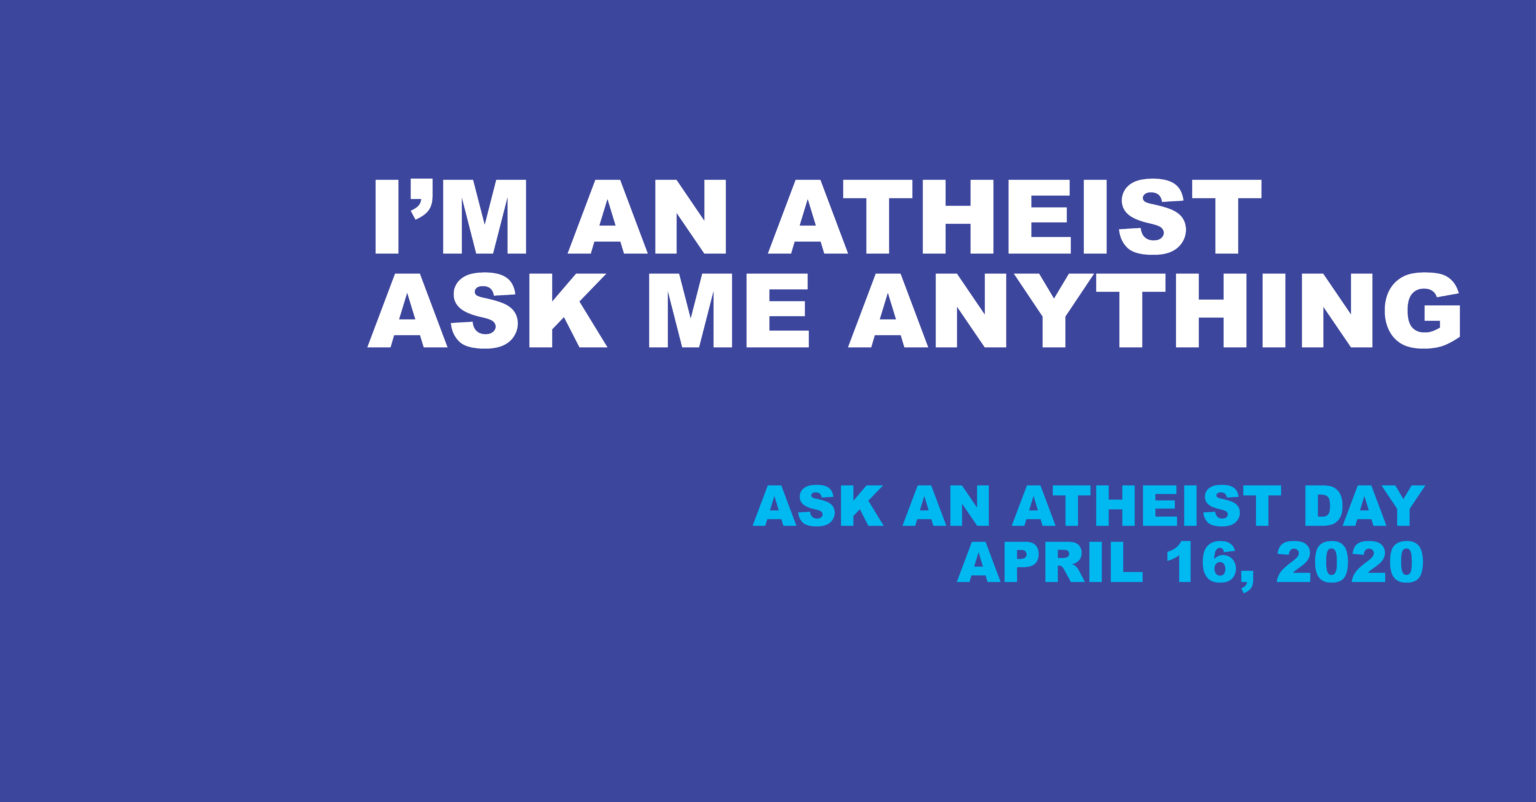 Ask An Atheist Day Secular Student Alliance